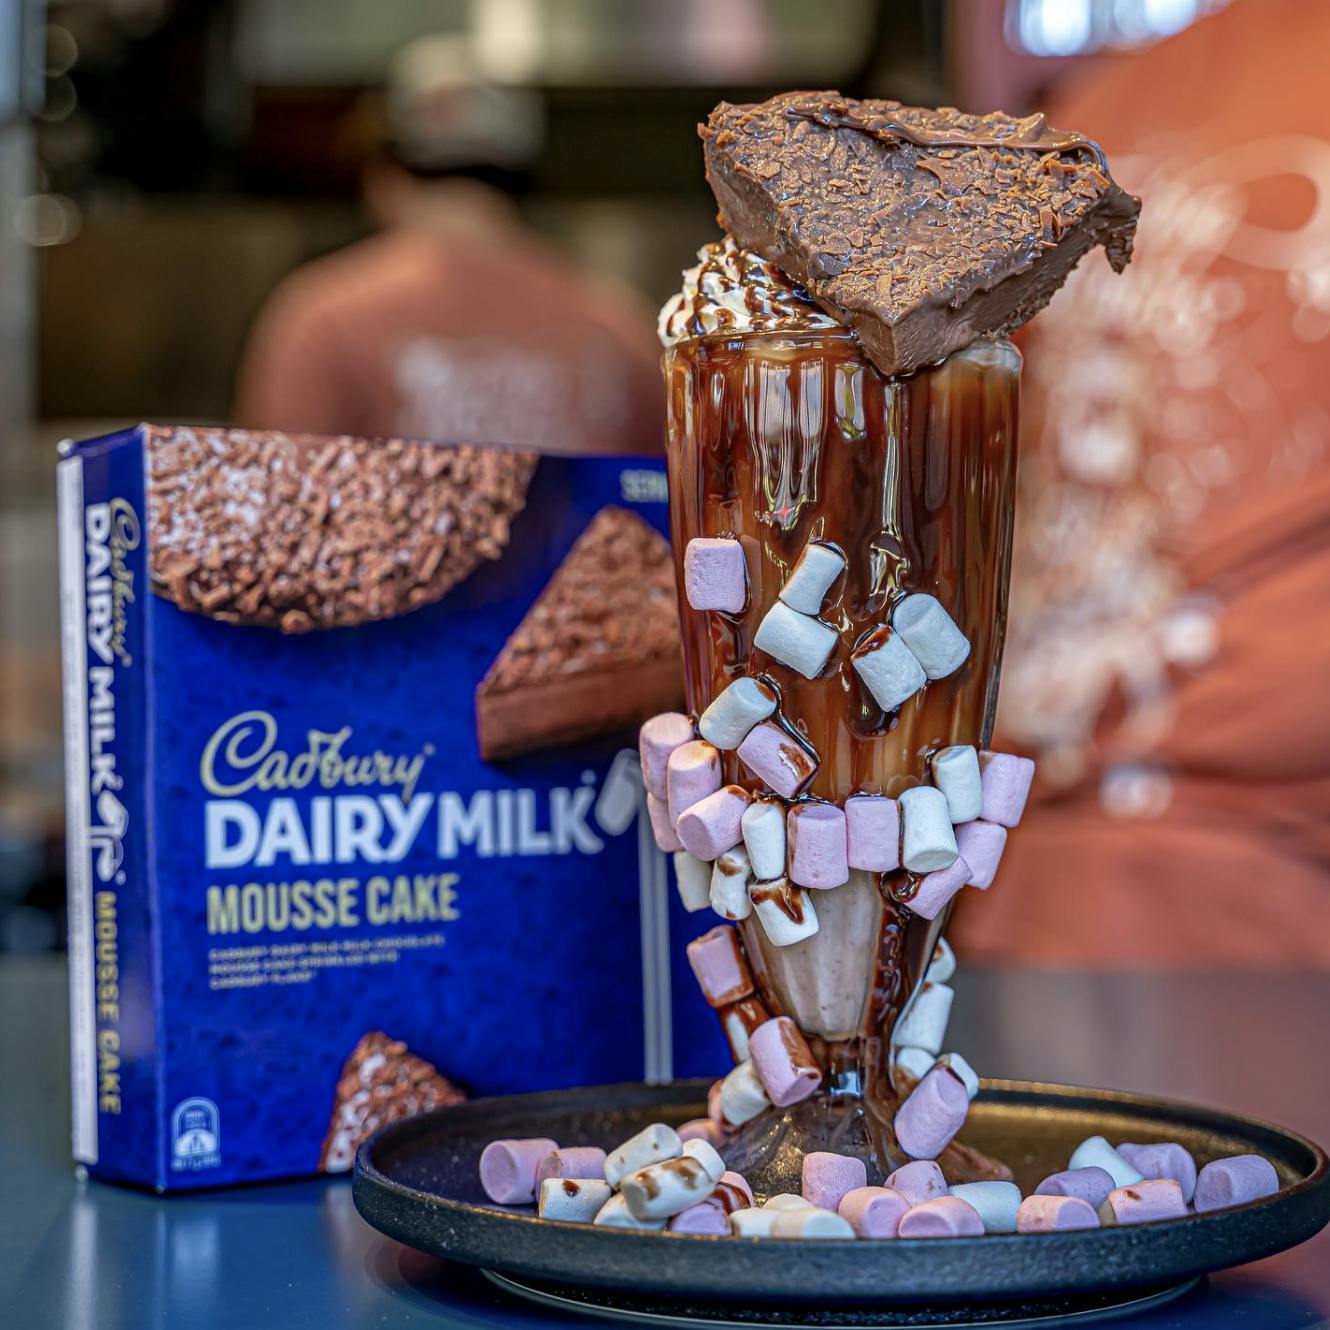 Image of a glass of marshmallow chocolate milkshake, with a box of Cadbury dairy milk cake in the background